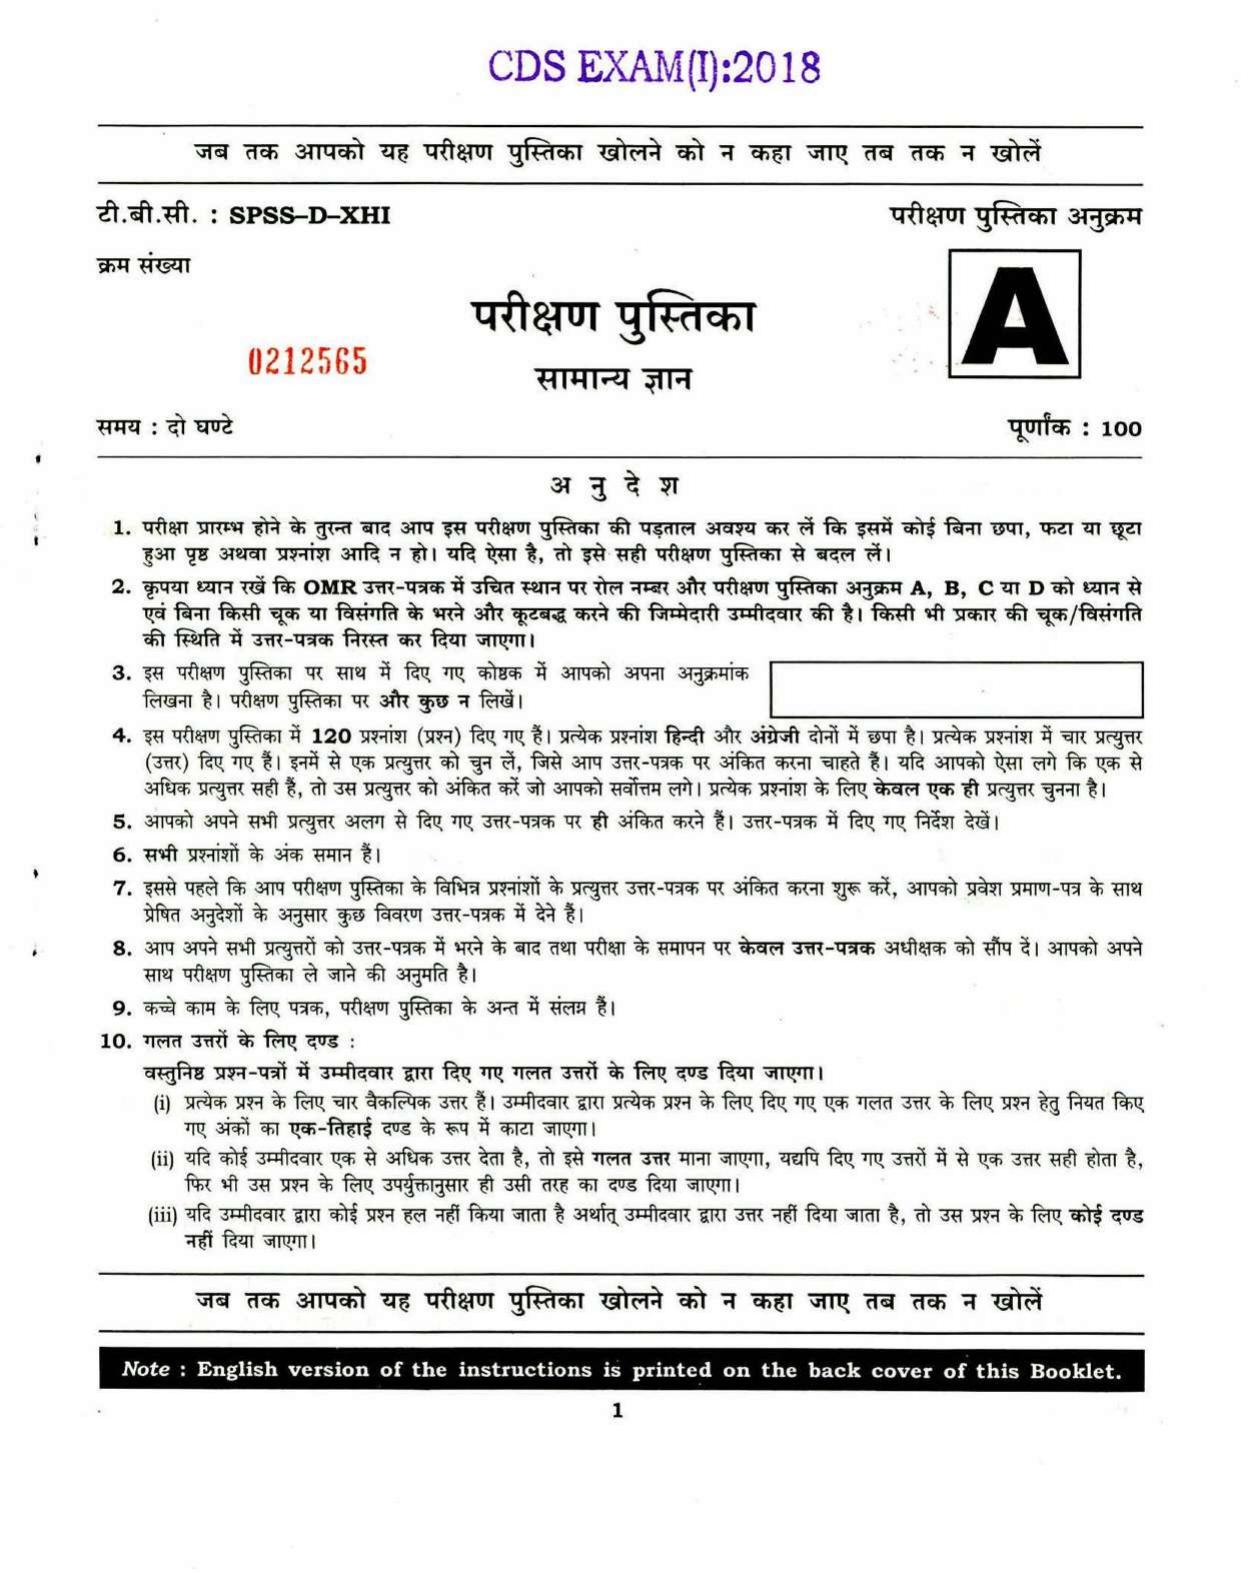 PBSSD General Knowledge Solved Papers - Page 1